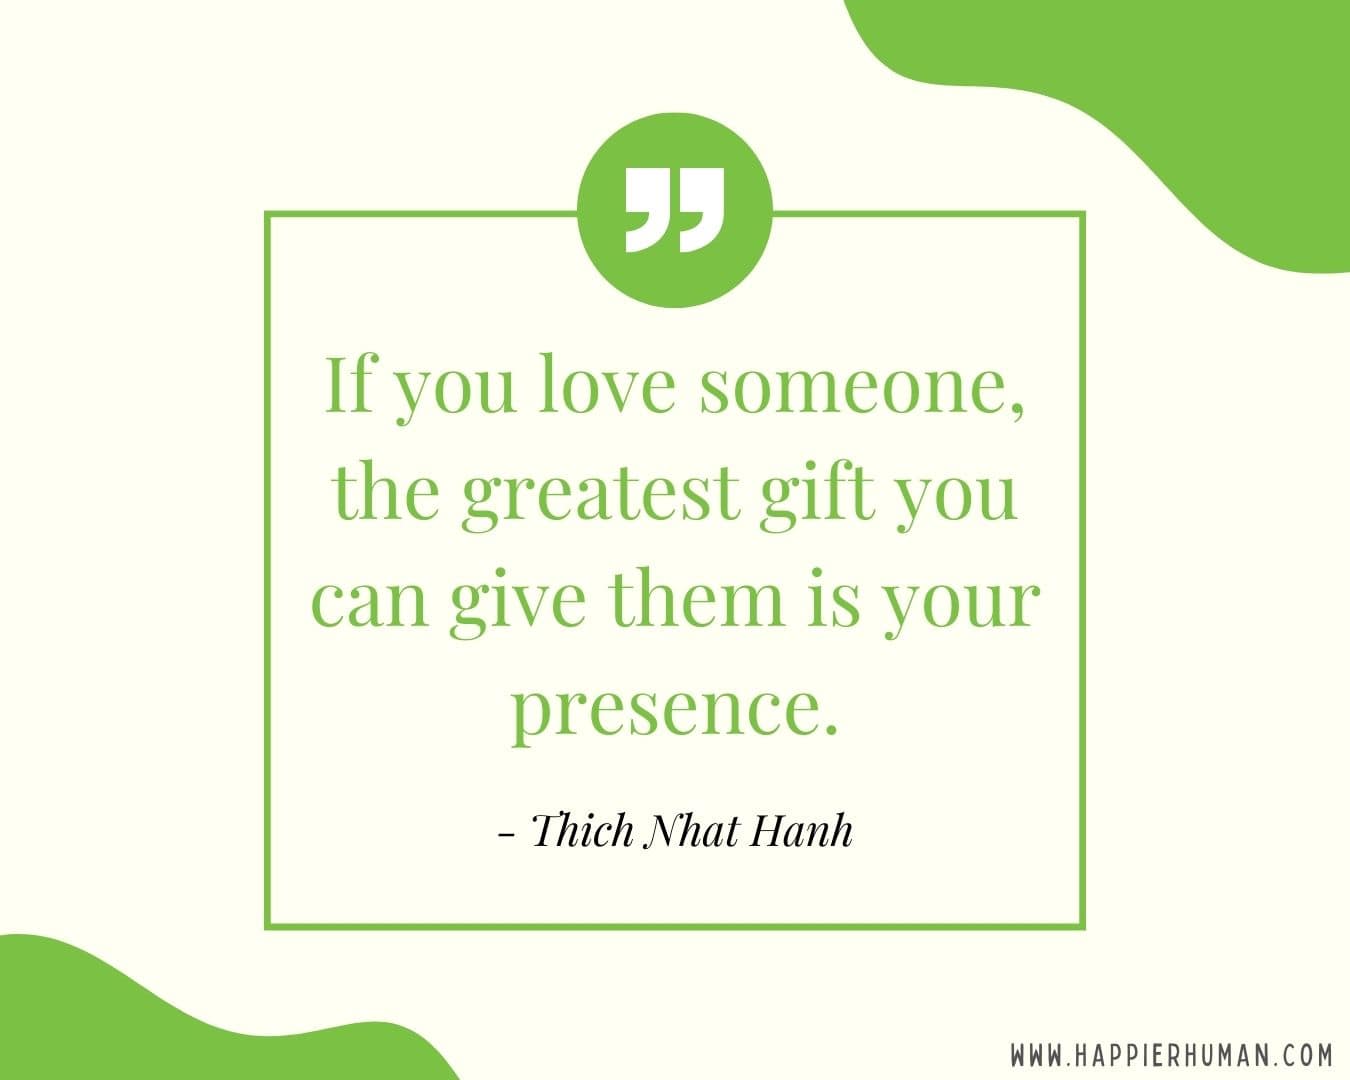 I’m Here for You Quotes - “If you love someone, the greatest gift you can give them is your presence.” – Thich Nhat Hanh